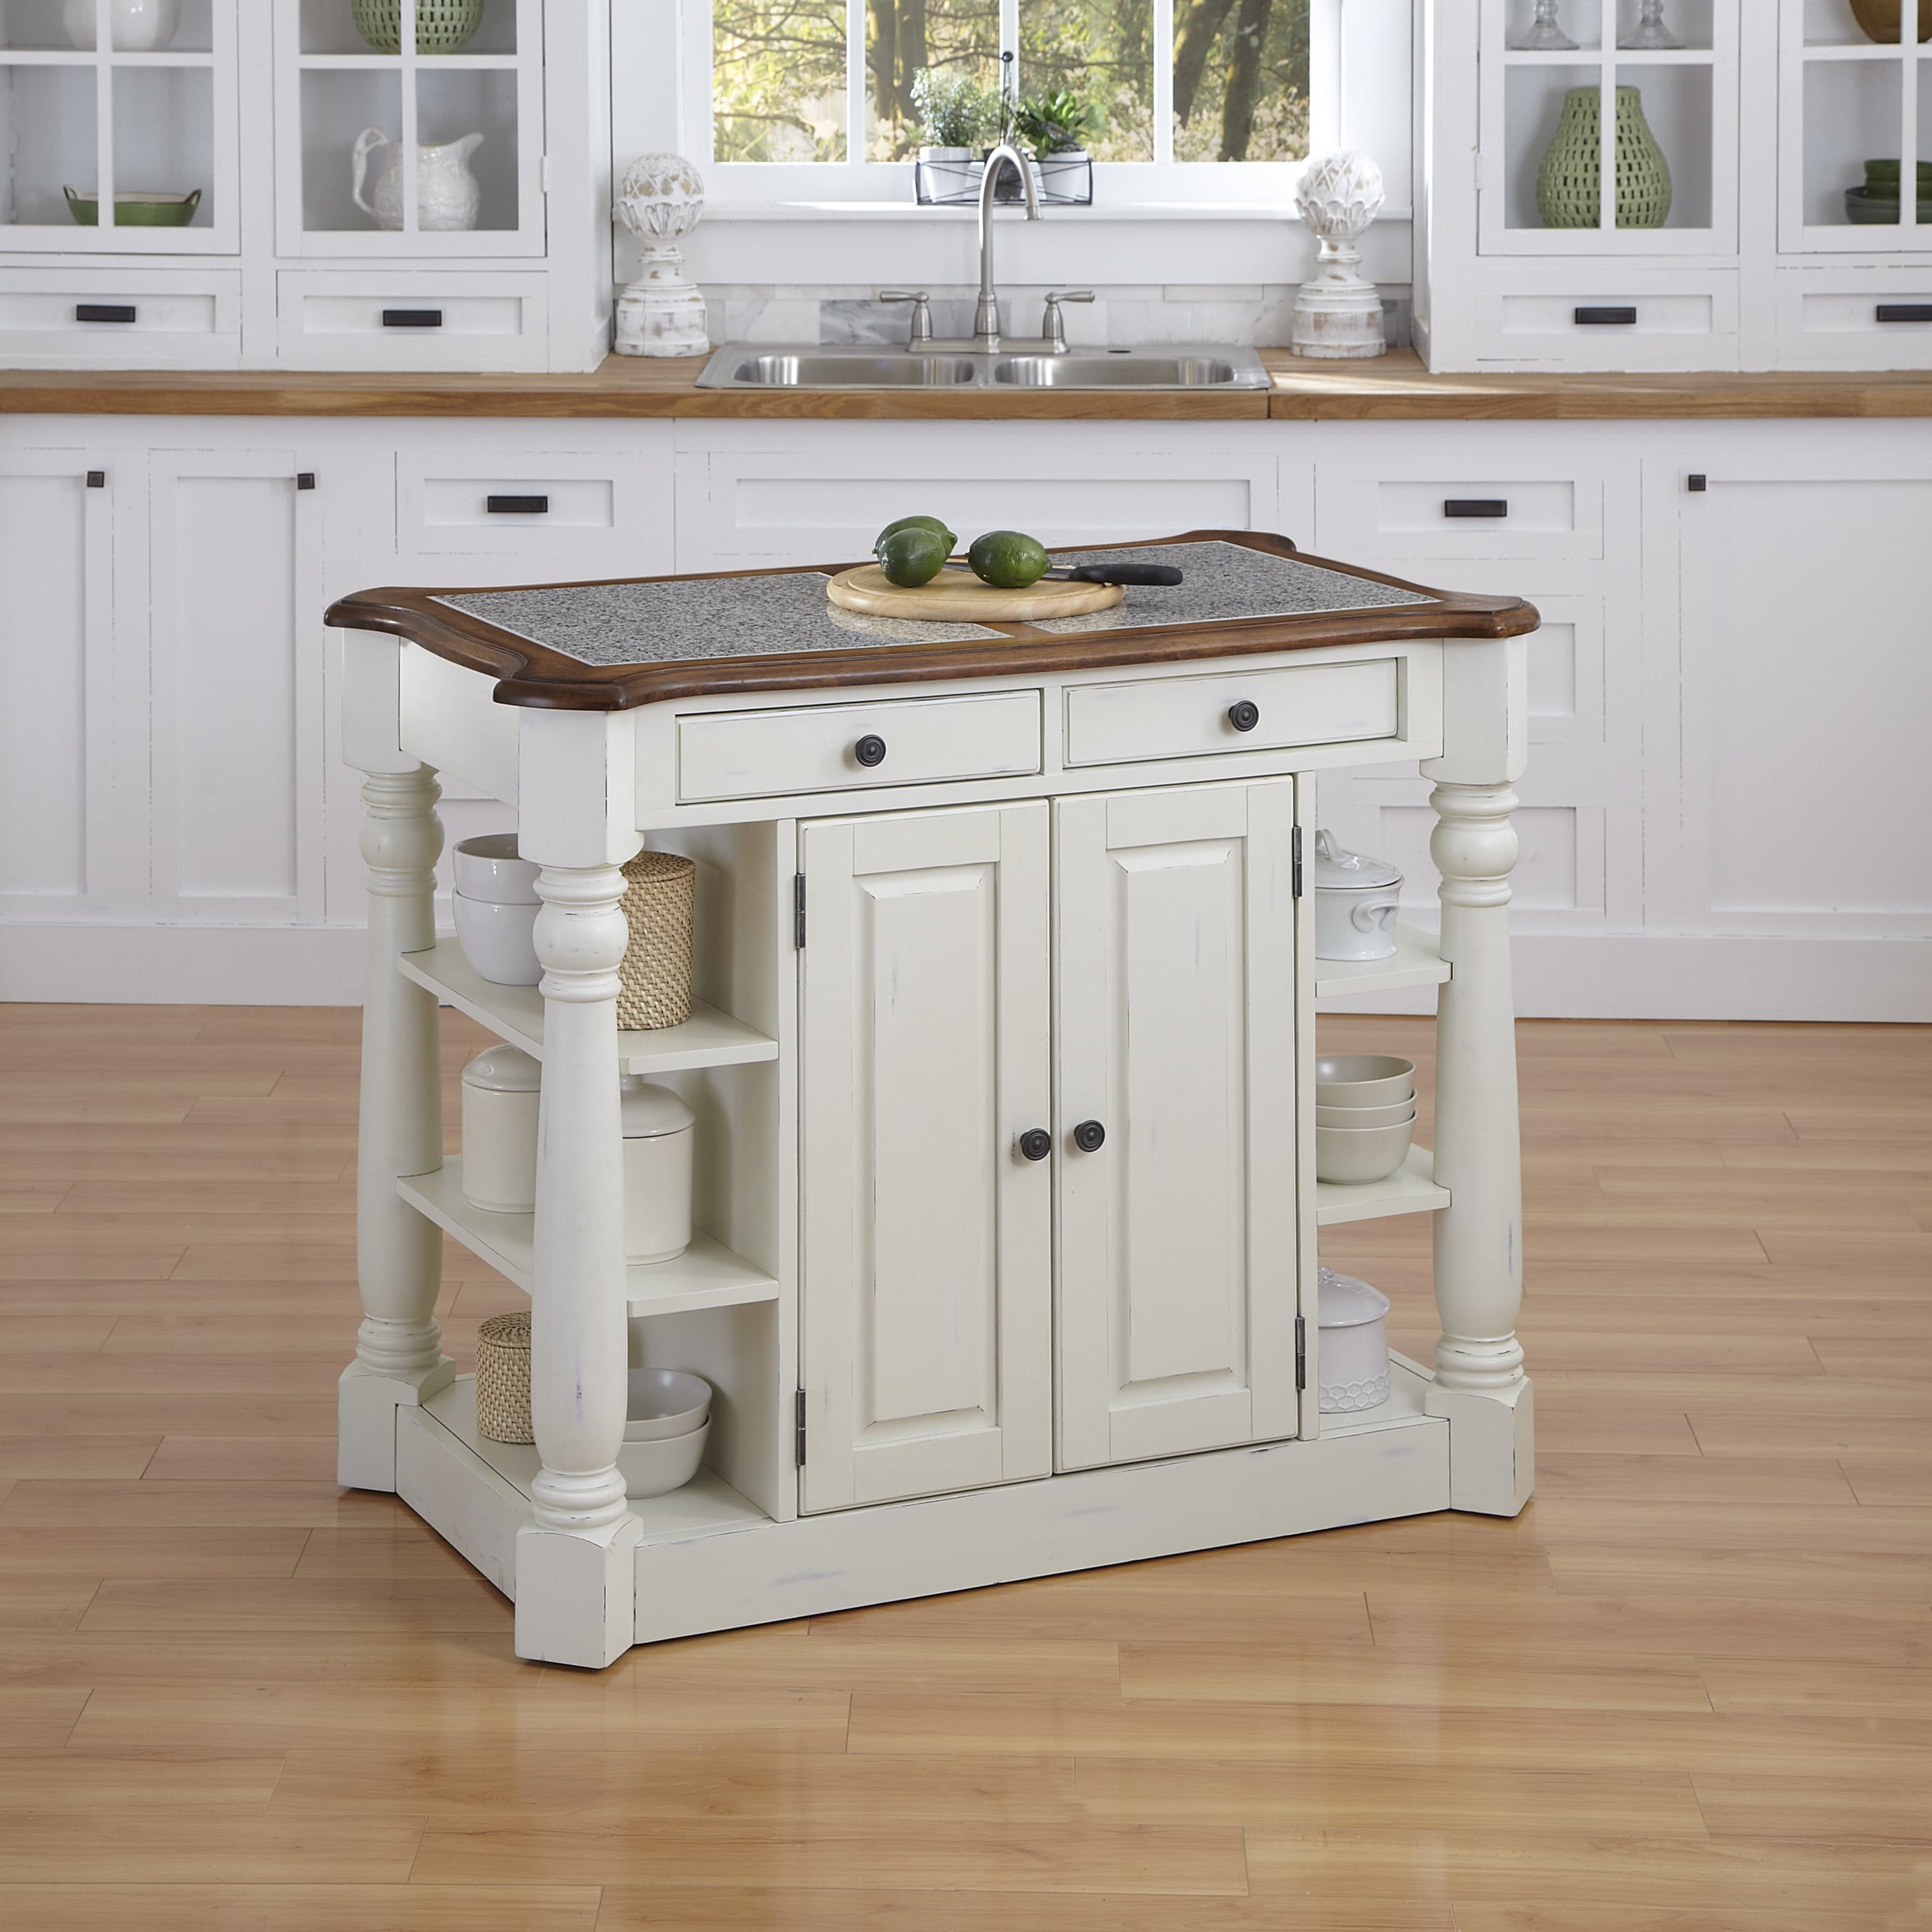 Shop Black Friday Deals On Americana Granite Kitchen Island By Home Styles Overstock 8408393